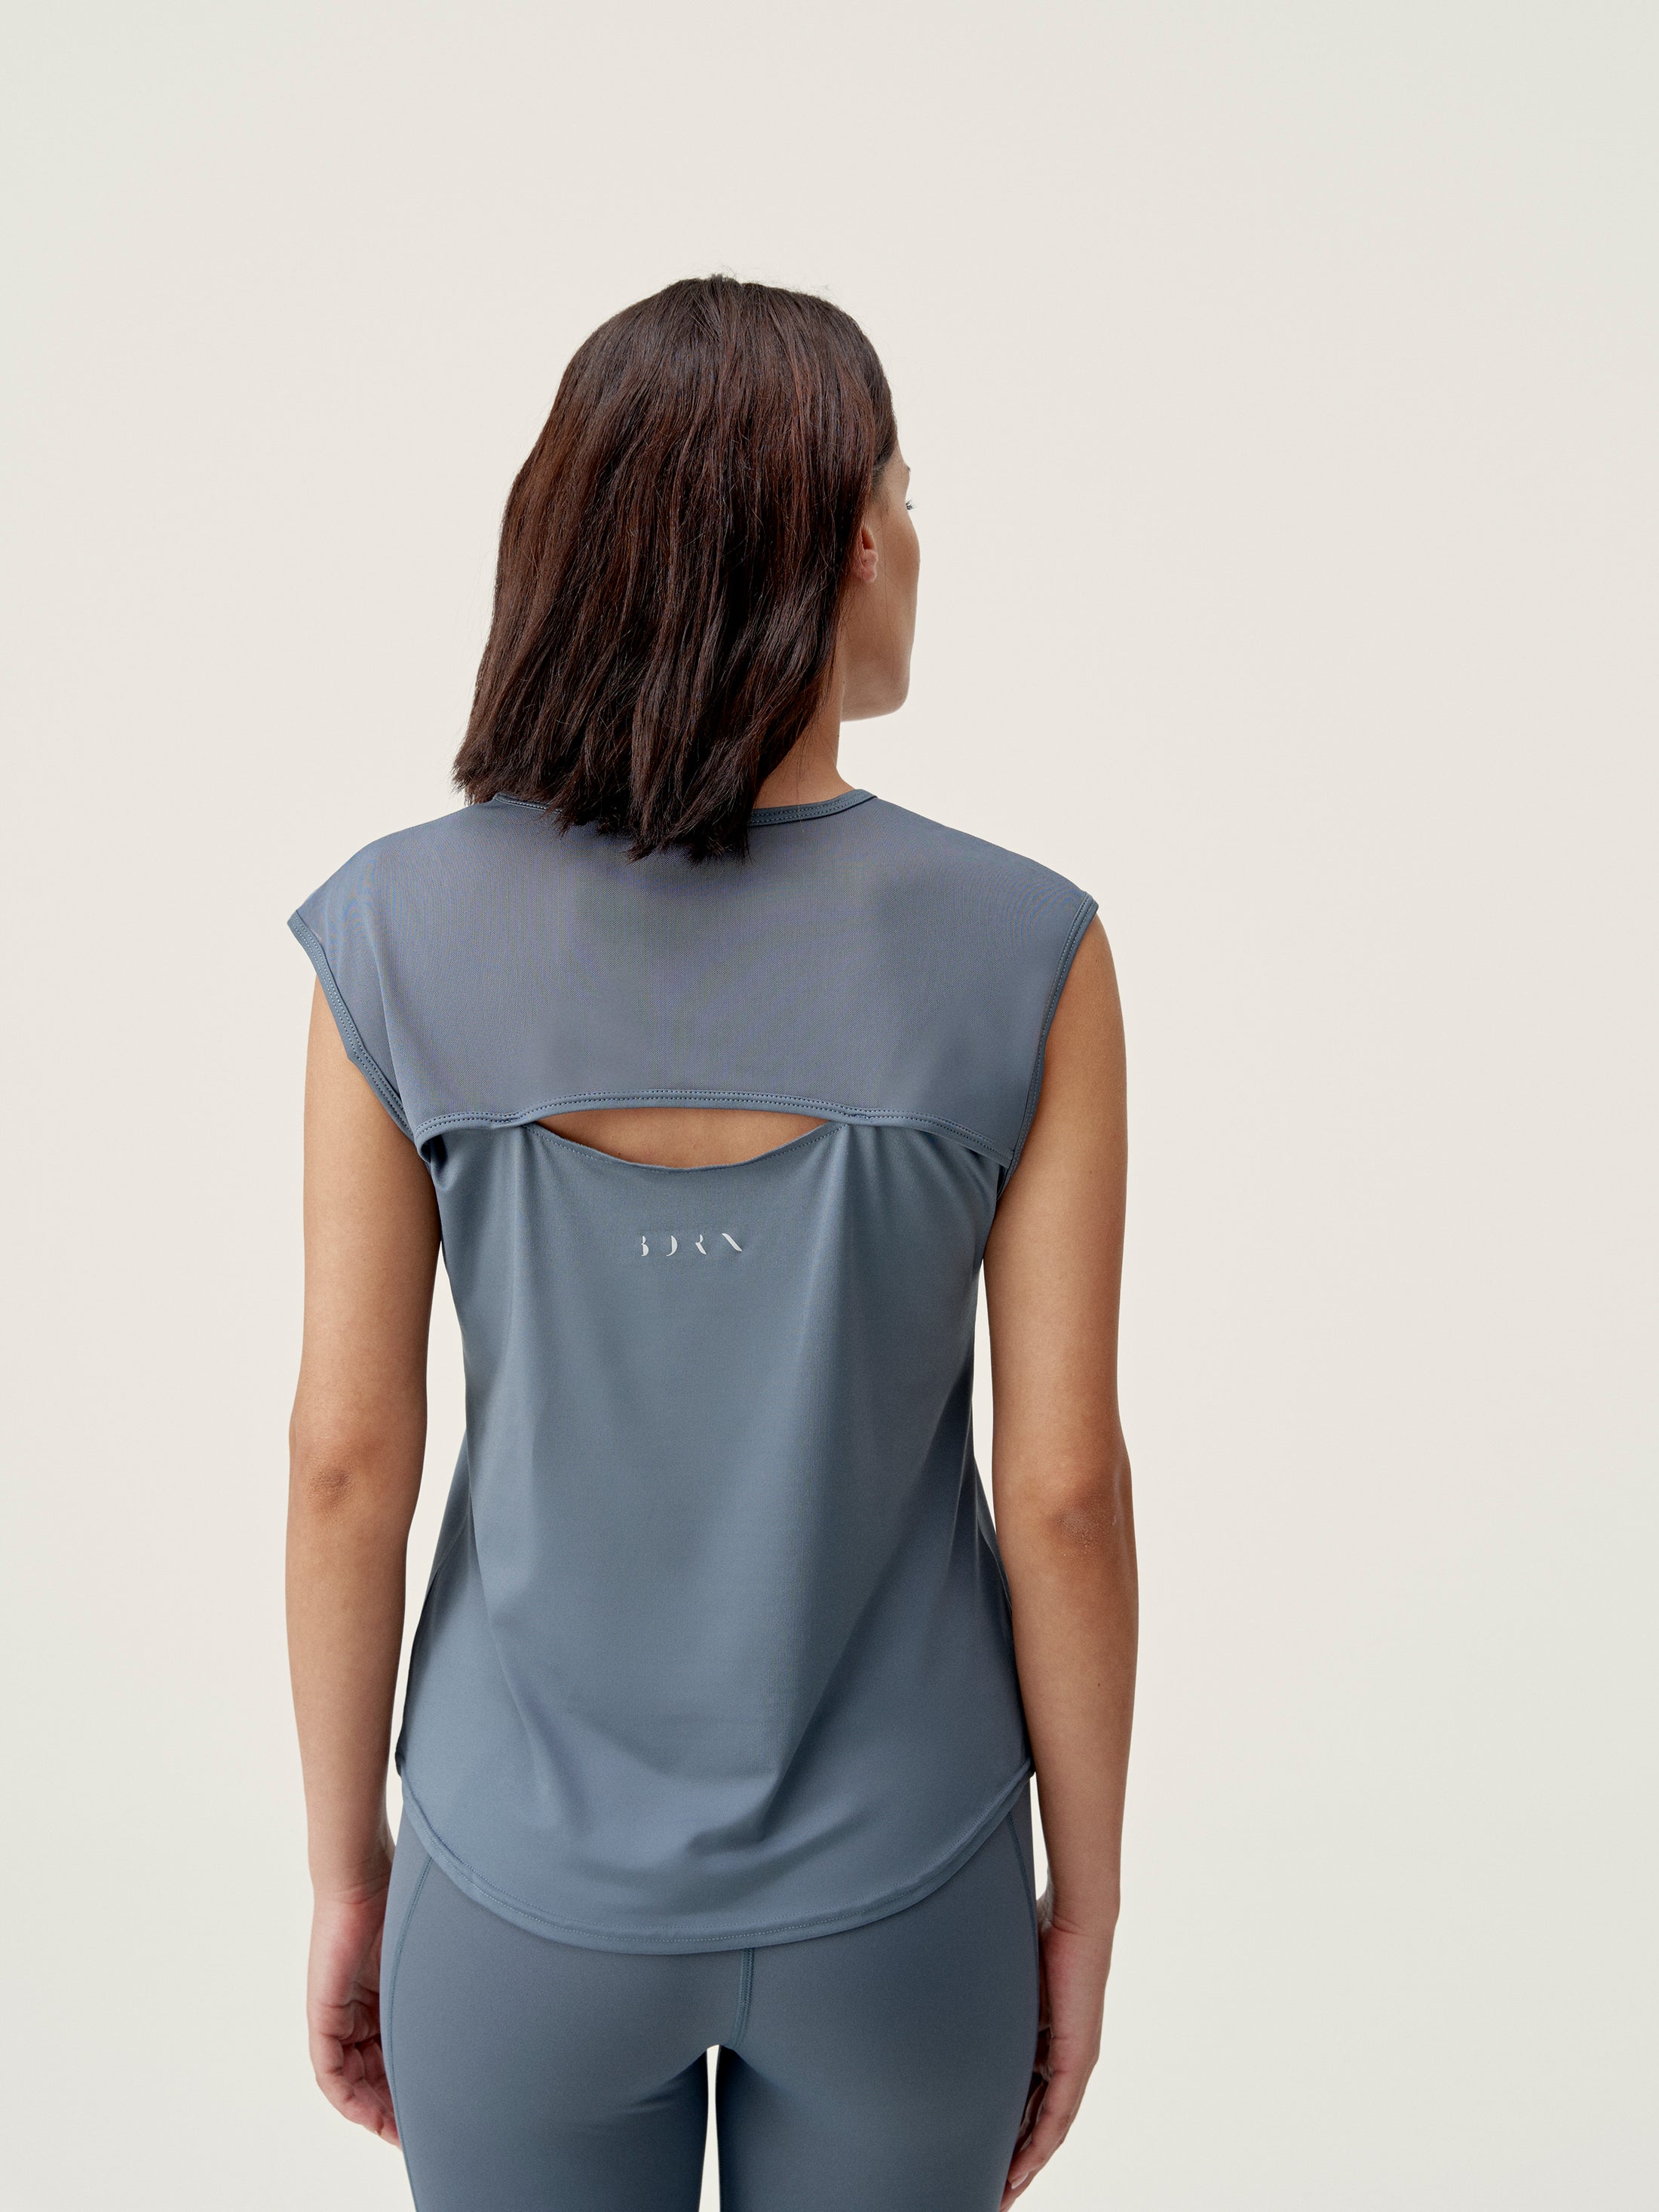 Sira T-Shirt in Stormy Grey